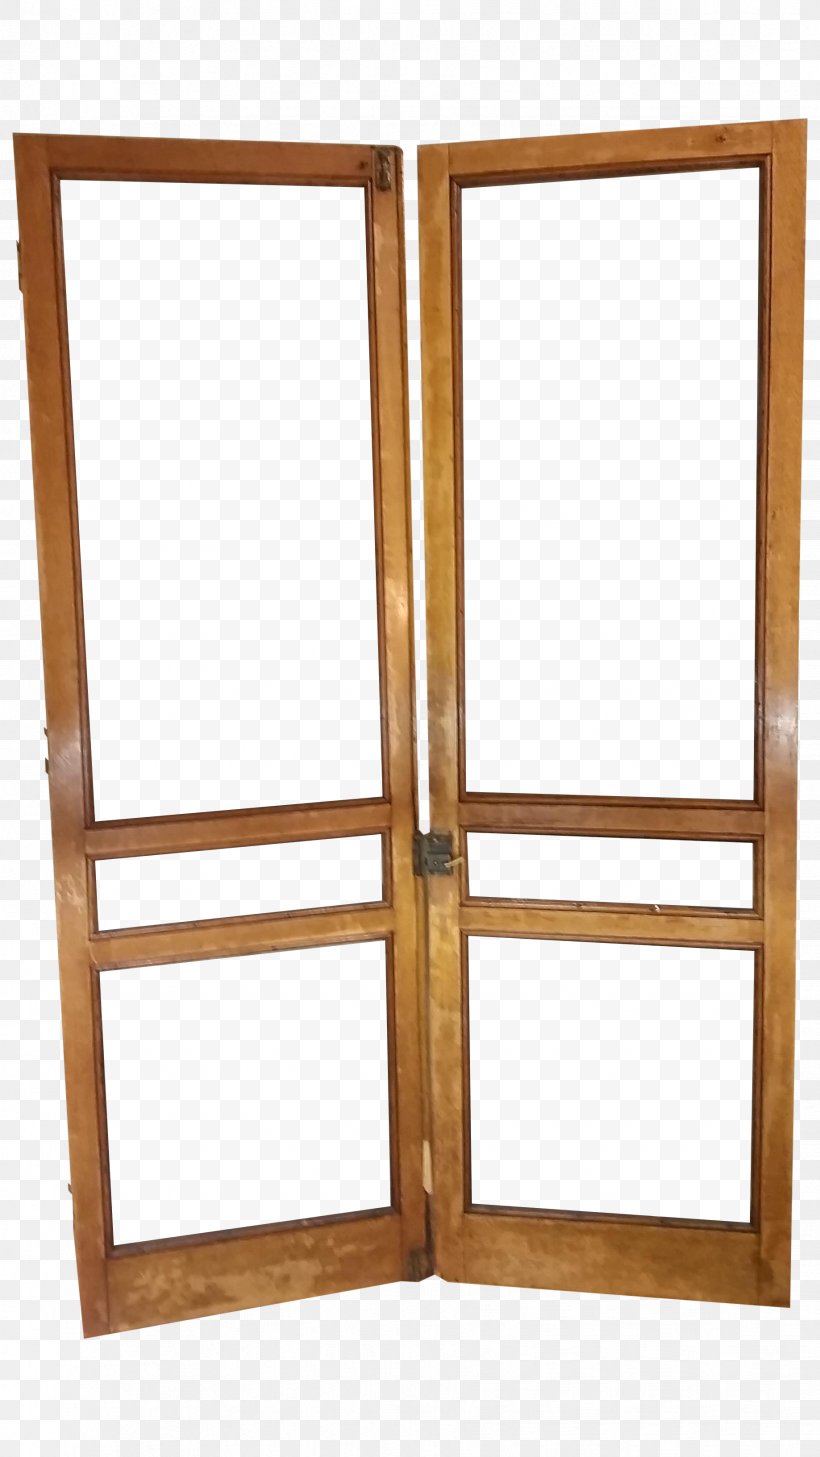 Hardwood Sash Window Picture Frames, PNG, 1837x3265px, Hardwood, Furniture, Picture Frame, Picture Frames, Sash Window Download Free